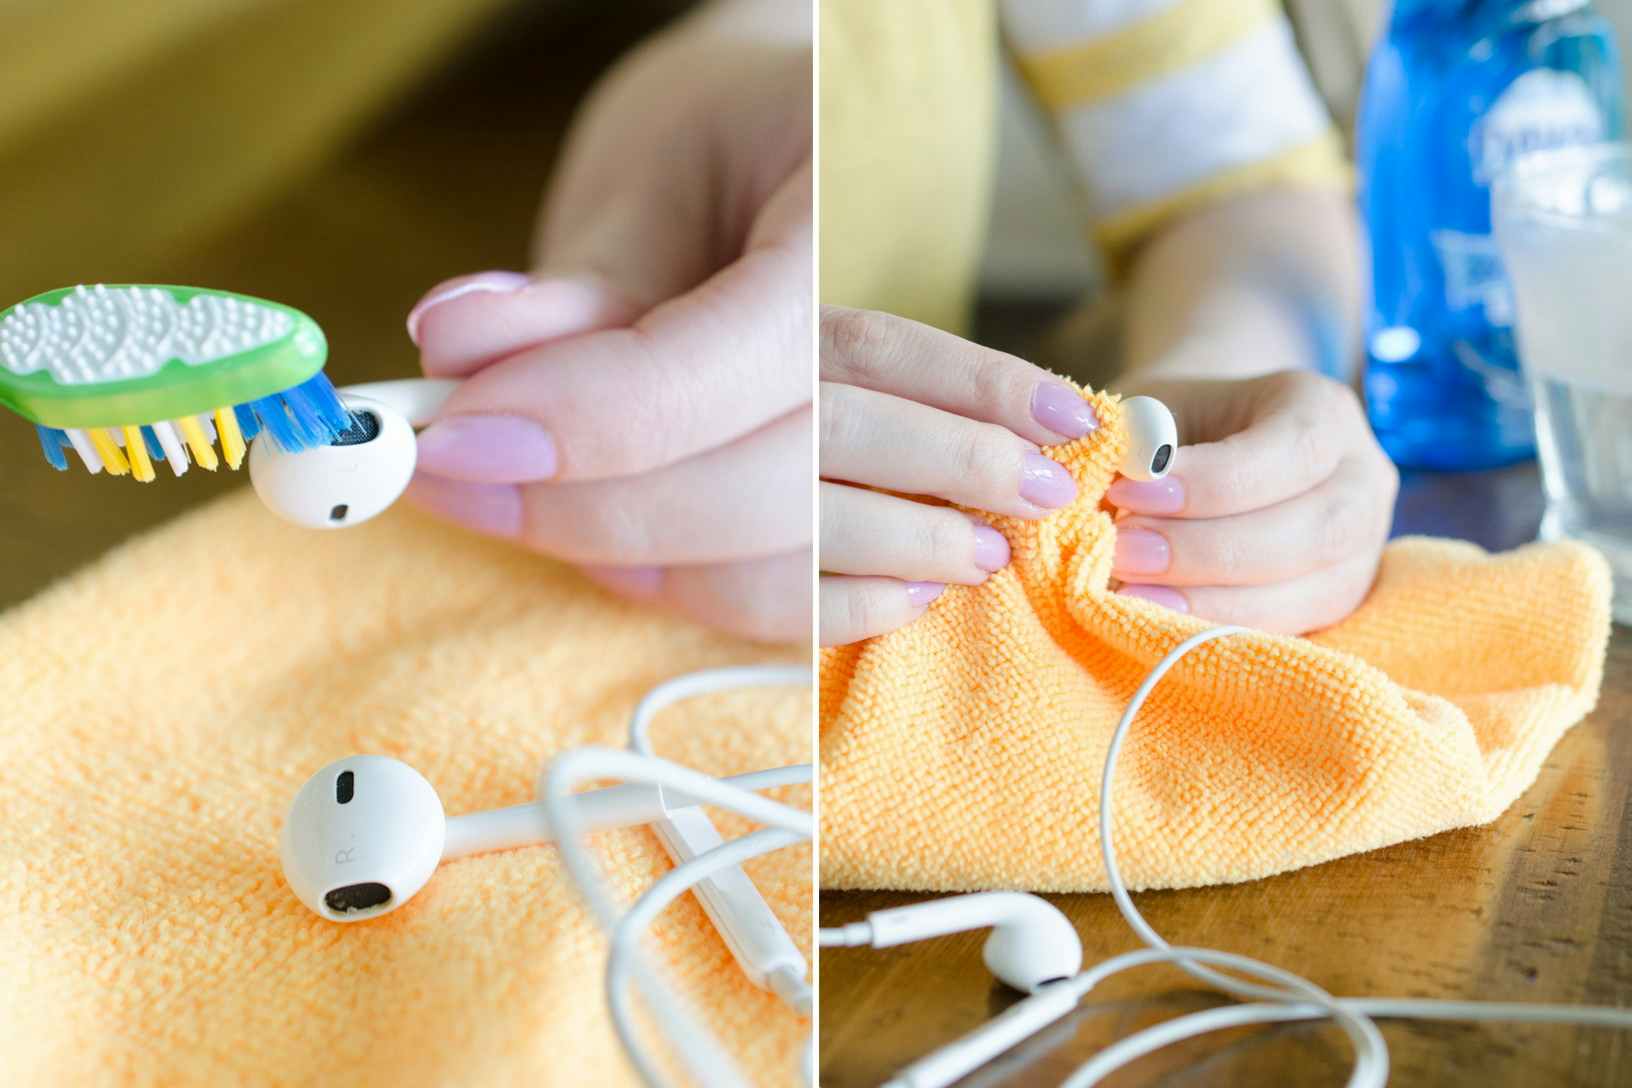 Use Dawn Dish Soap to remove dirt and dust from your earbuds.